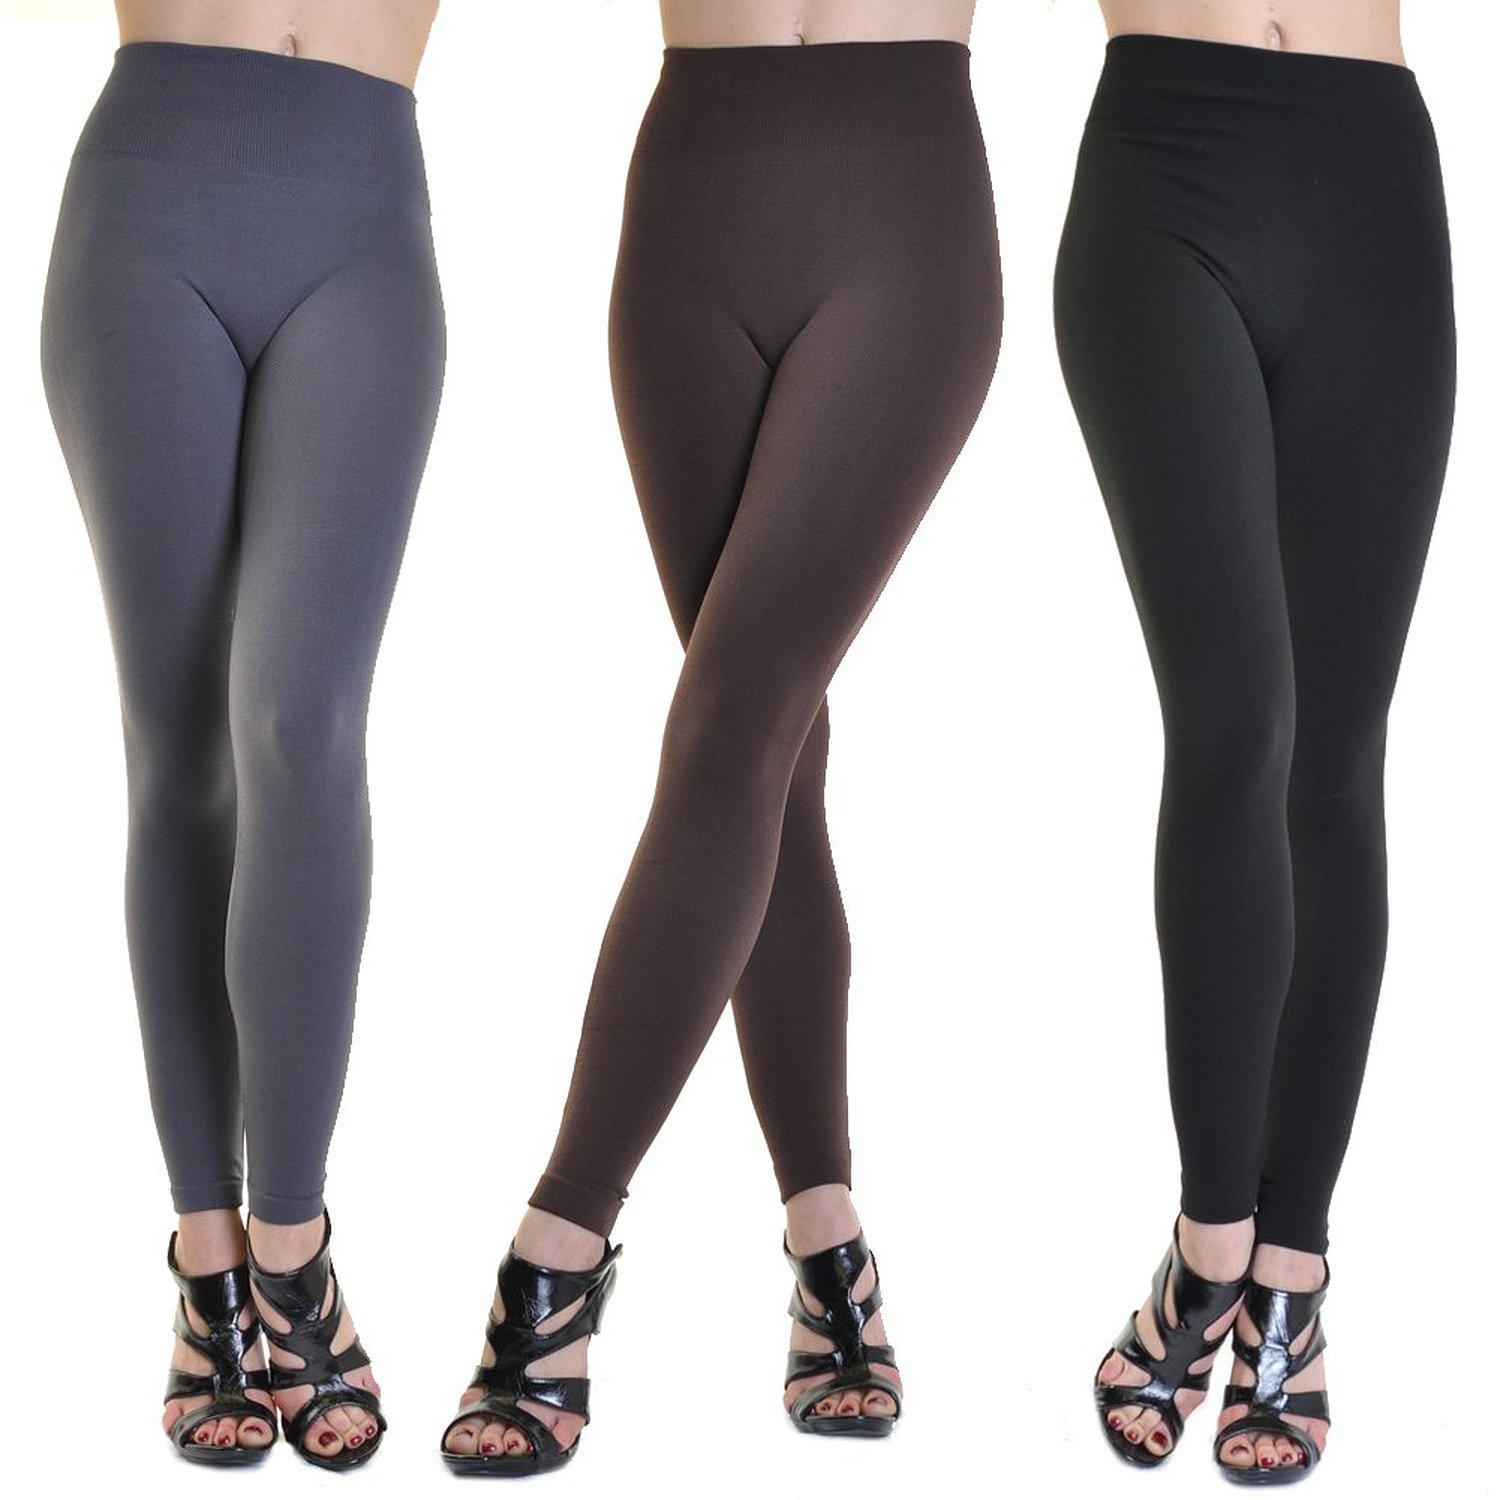 Leggings vs Tights: What Is the Difference?